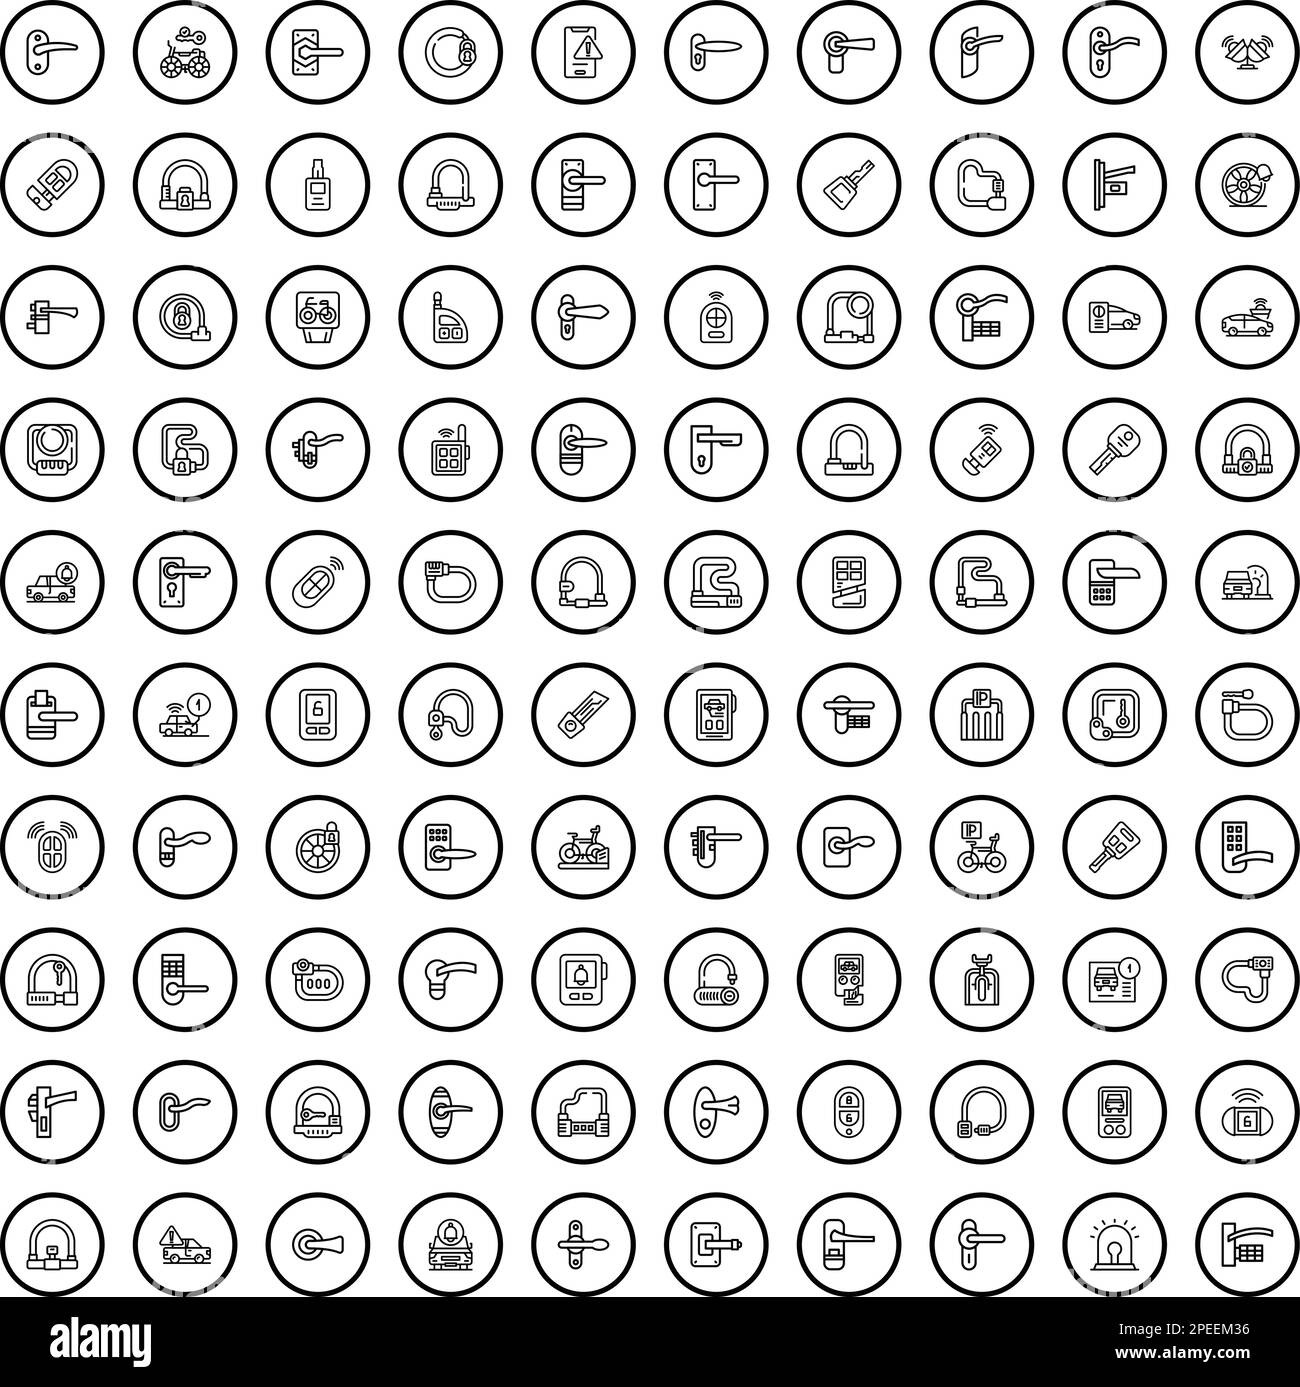 100 security icons set. Outline illustration of 100 security icons vector set isolated on white background Stock Vector